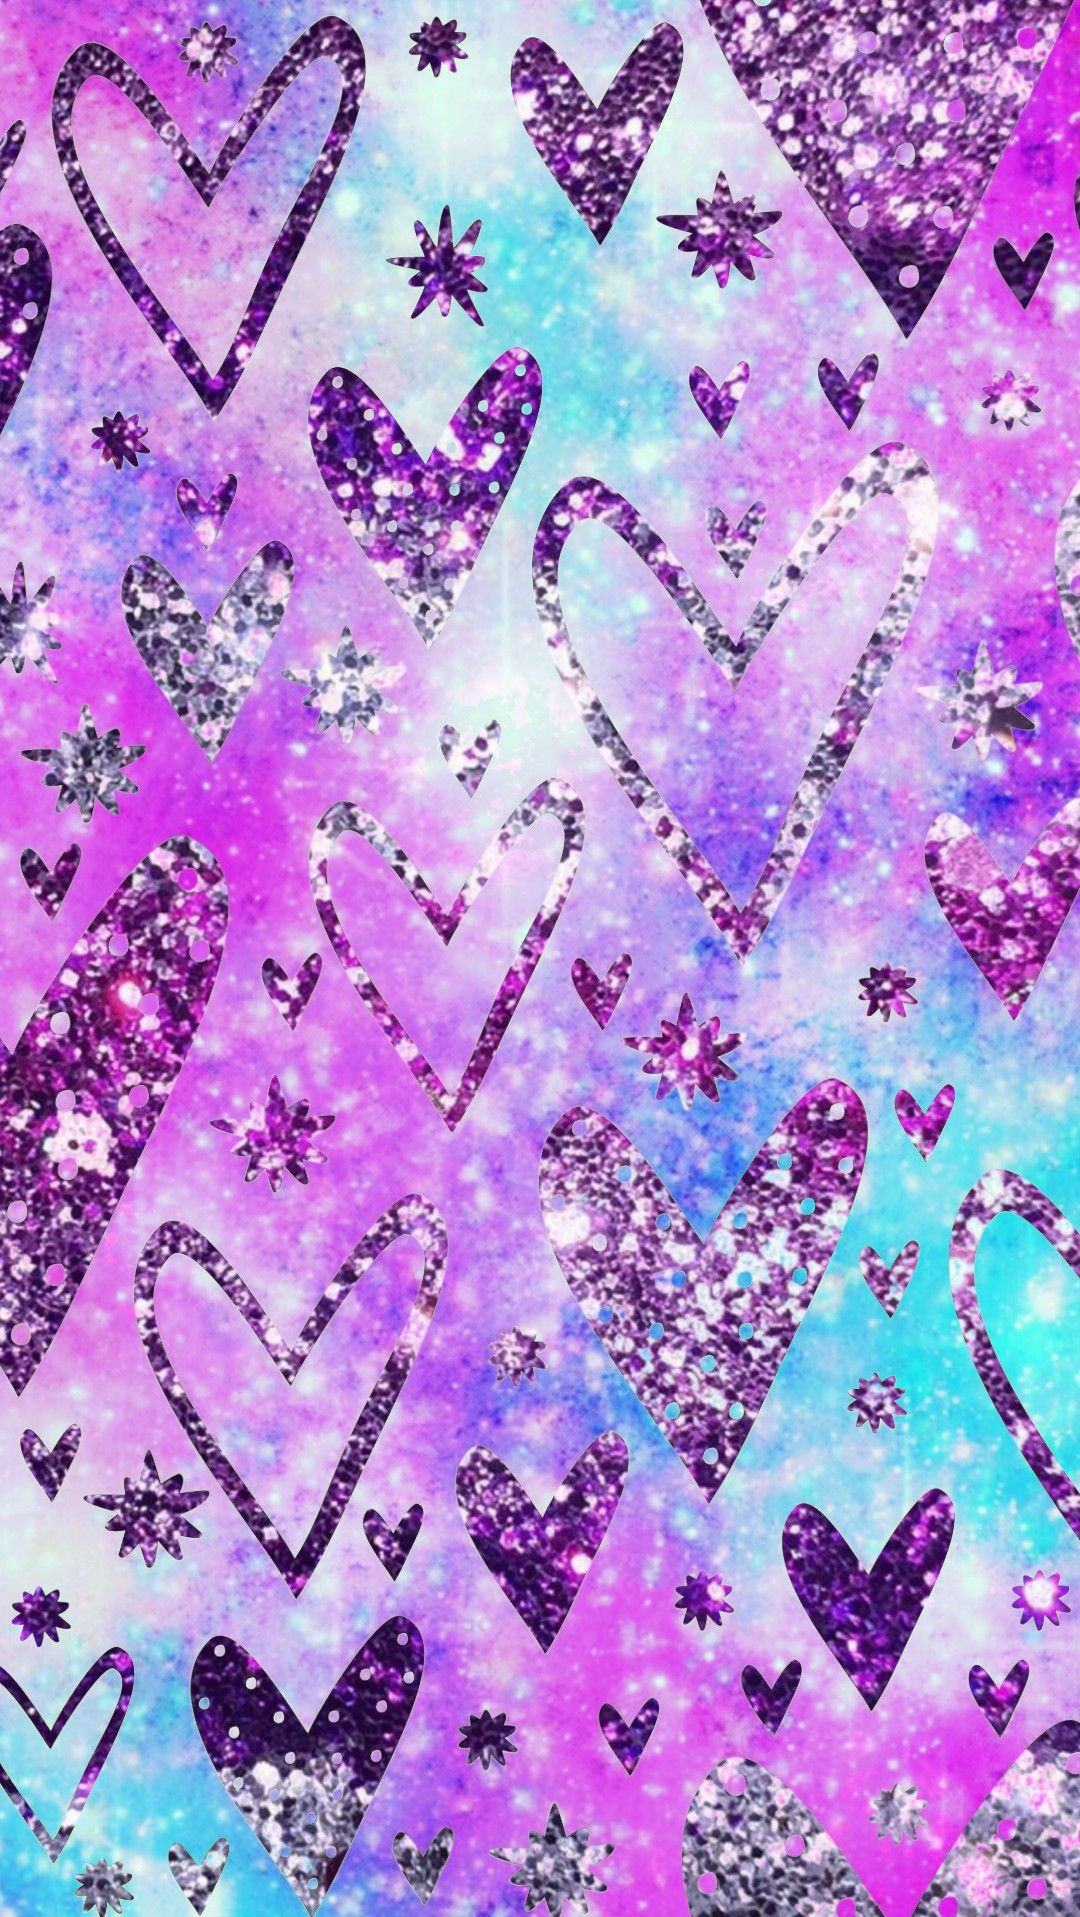 Funky Glittery Hearts, made by me #purple #sparkly #wallpaper #background #sparkles #gl. Valentines wallpaper, Love wallpaper background, Pink wallpaper iphone